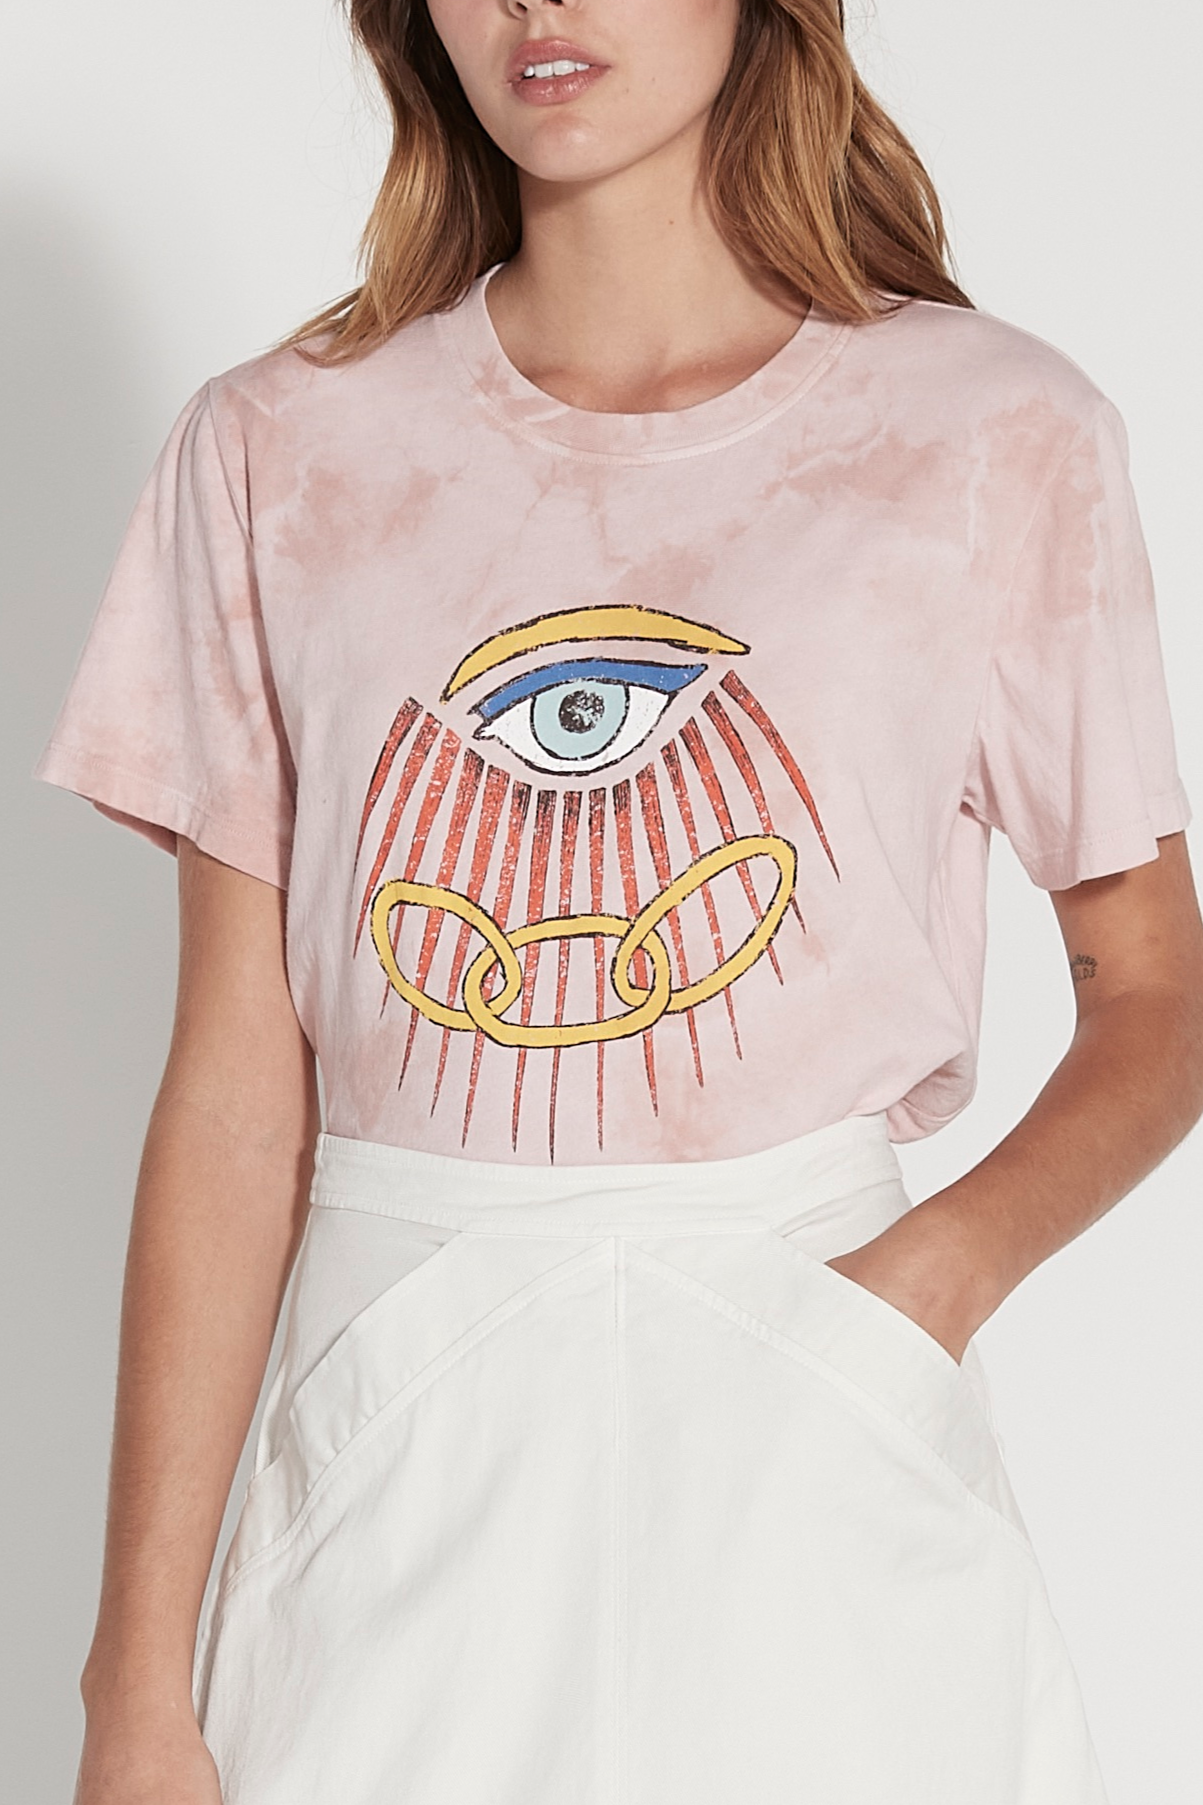 Rose Eye Betty Tshirt Front Close-Up View